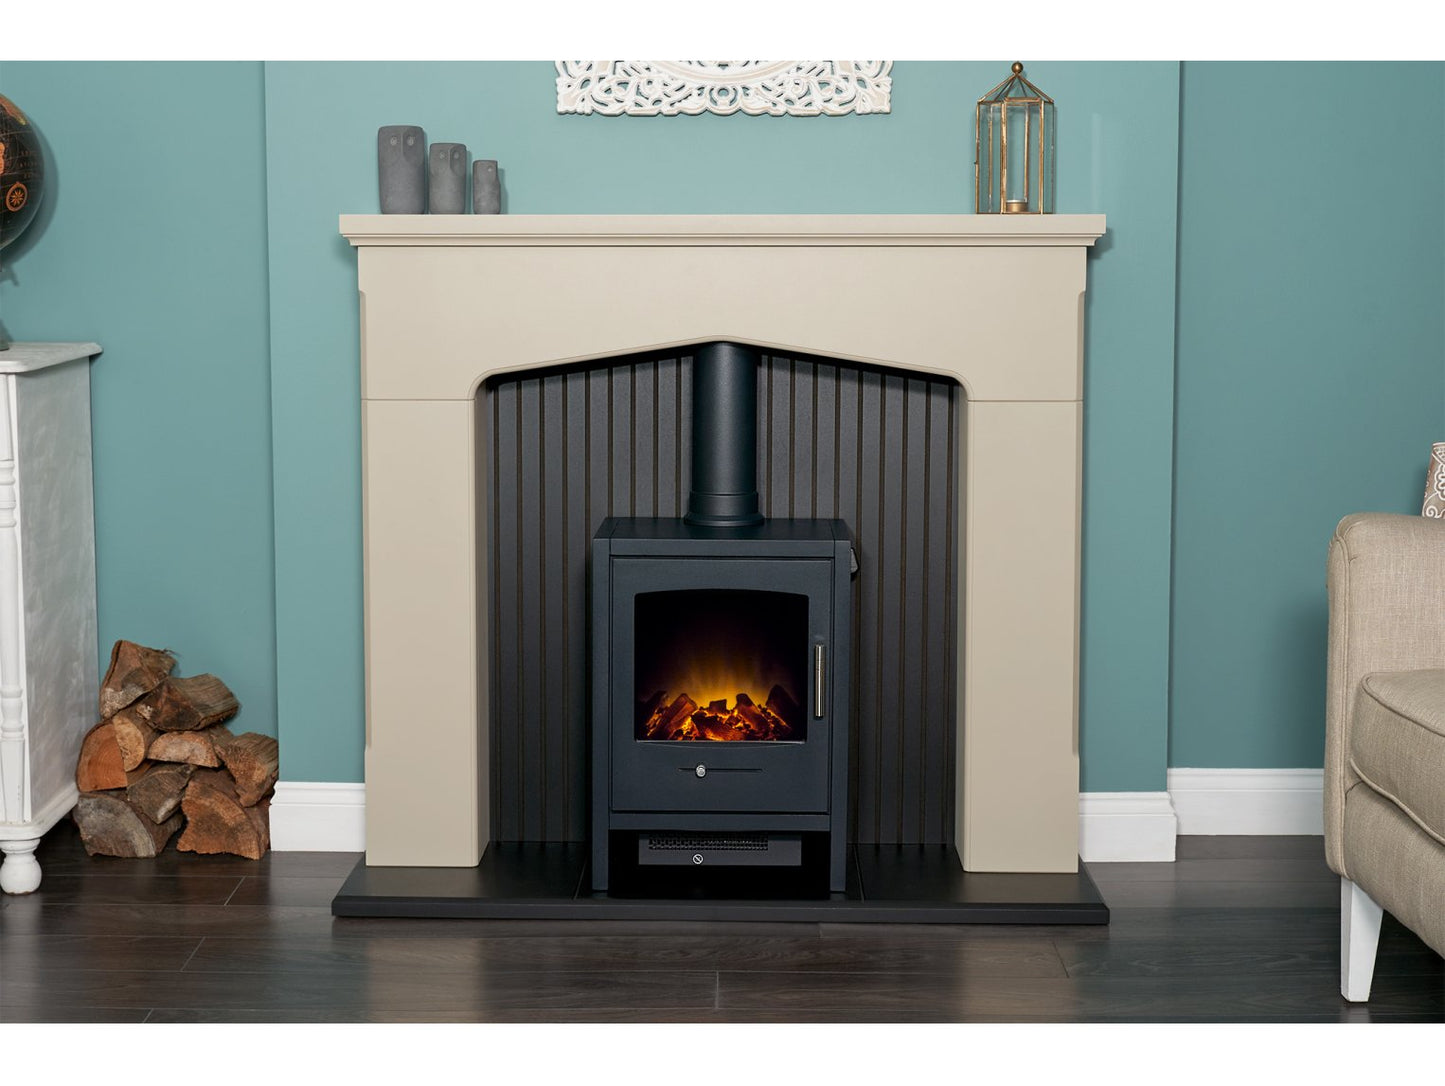 Adam Ludlow Stove Fireplace Stone Effect + Bergen Electric Stove Charcoal Grey, 48"